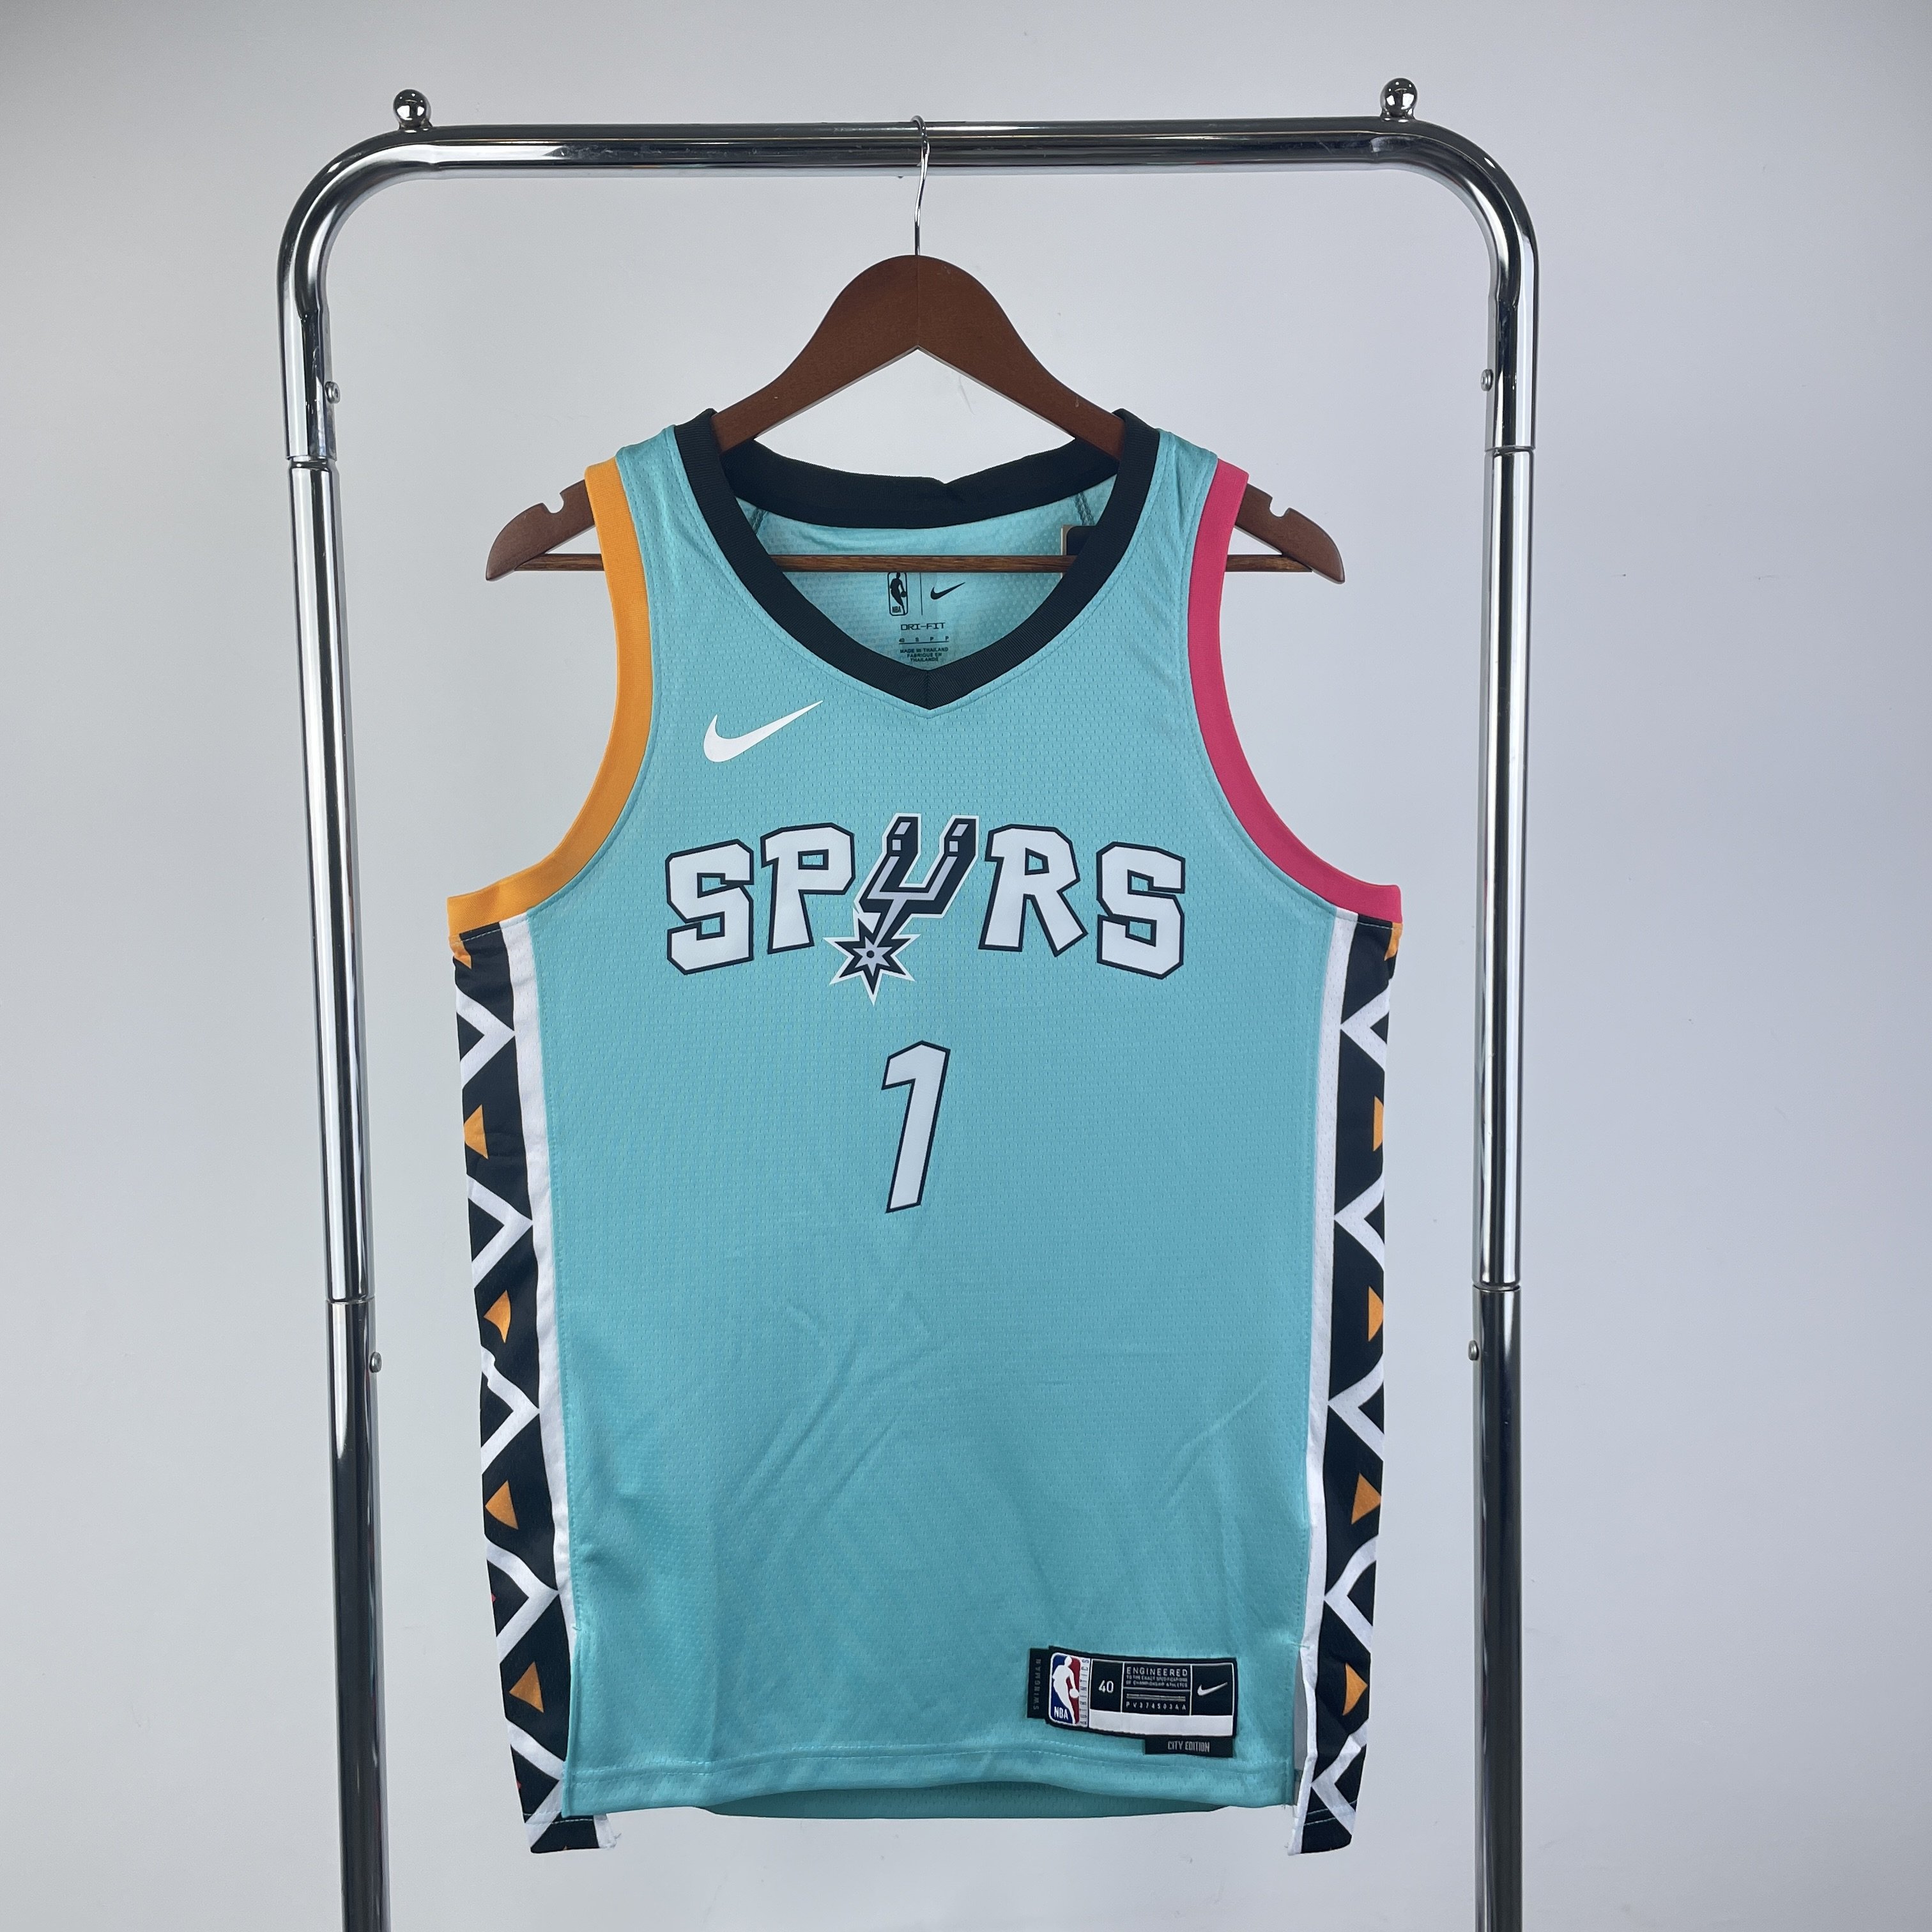 Spurs City Edition Jerseys Are They Hot or Not? 